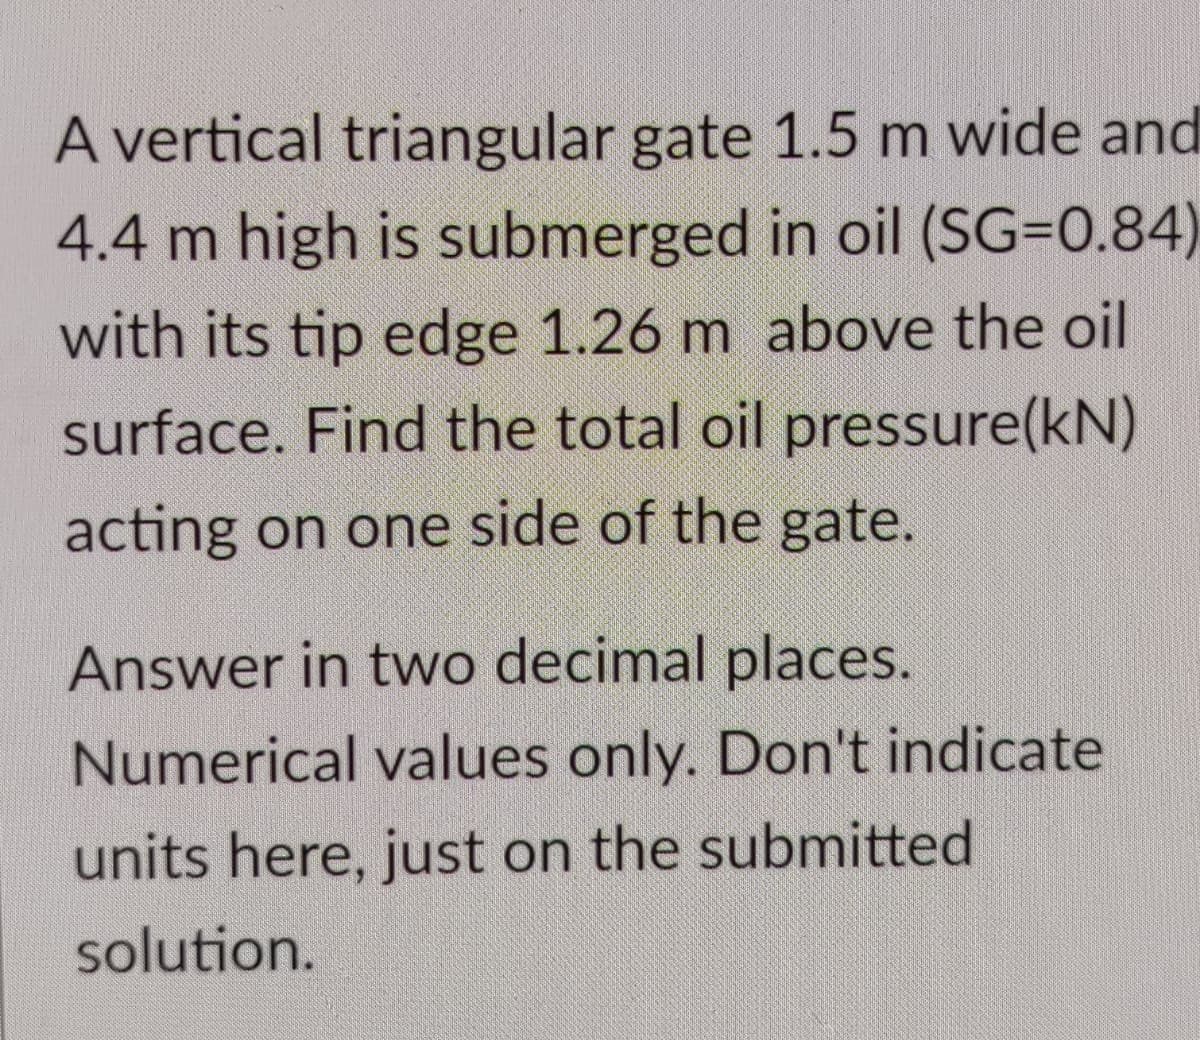 A vertical triangular gate 1.5 m wide and
4.4 m high is submerged in oil (SG=0.84)
with its tip edge 1.26 m above the oil
surface. Find the total oil pressure(kN)
acting on one side of the gate.
Answer in two decimal places.
Numerical values only. Don't indicate
units here, just on the submitted
solution.
